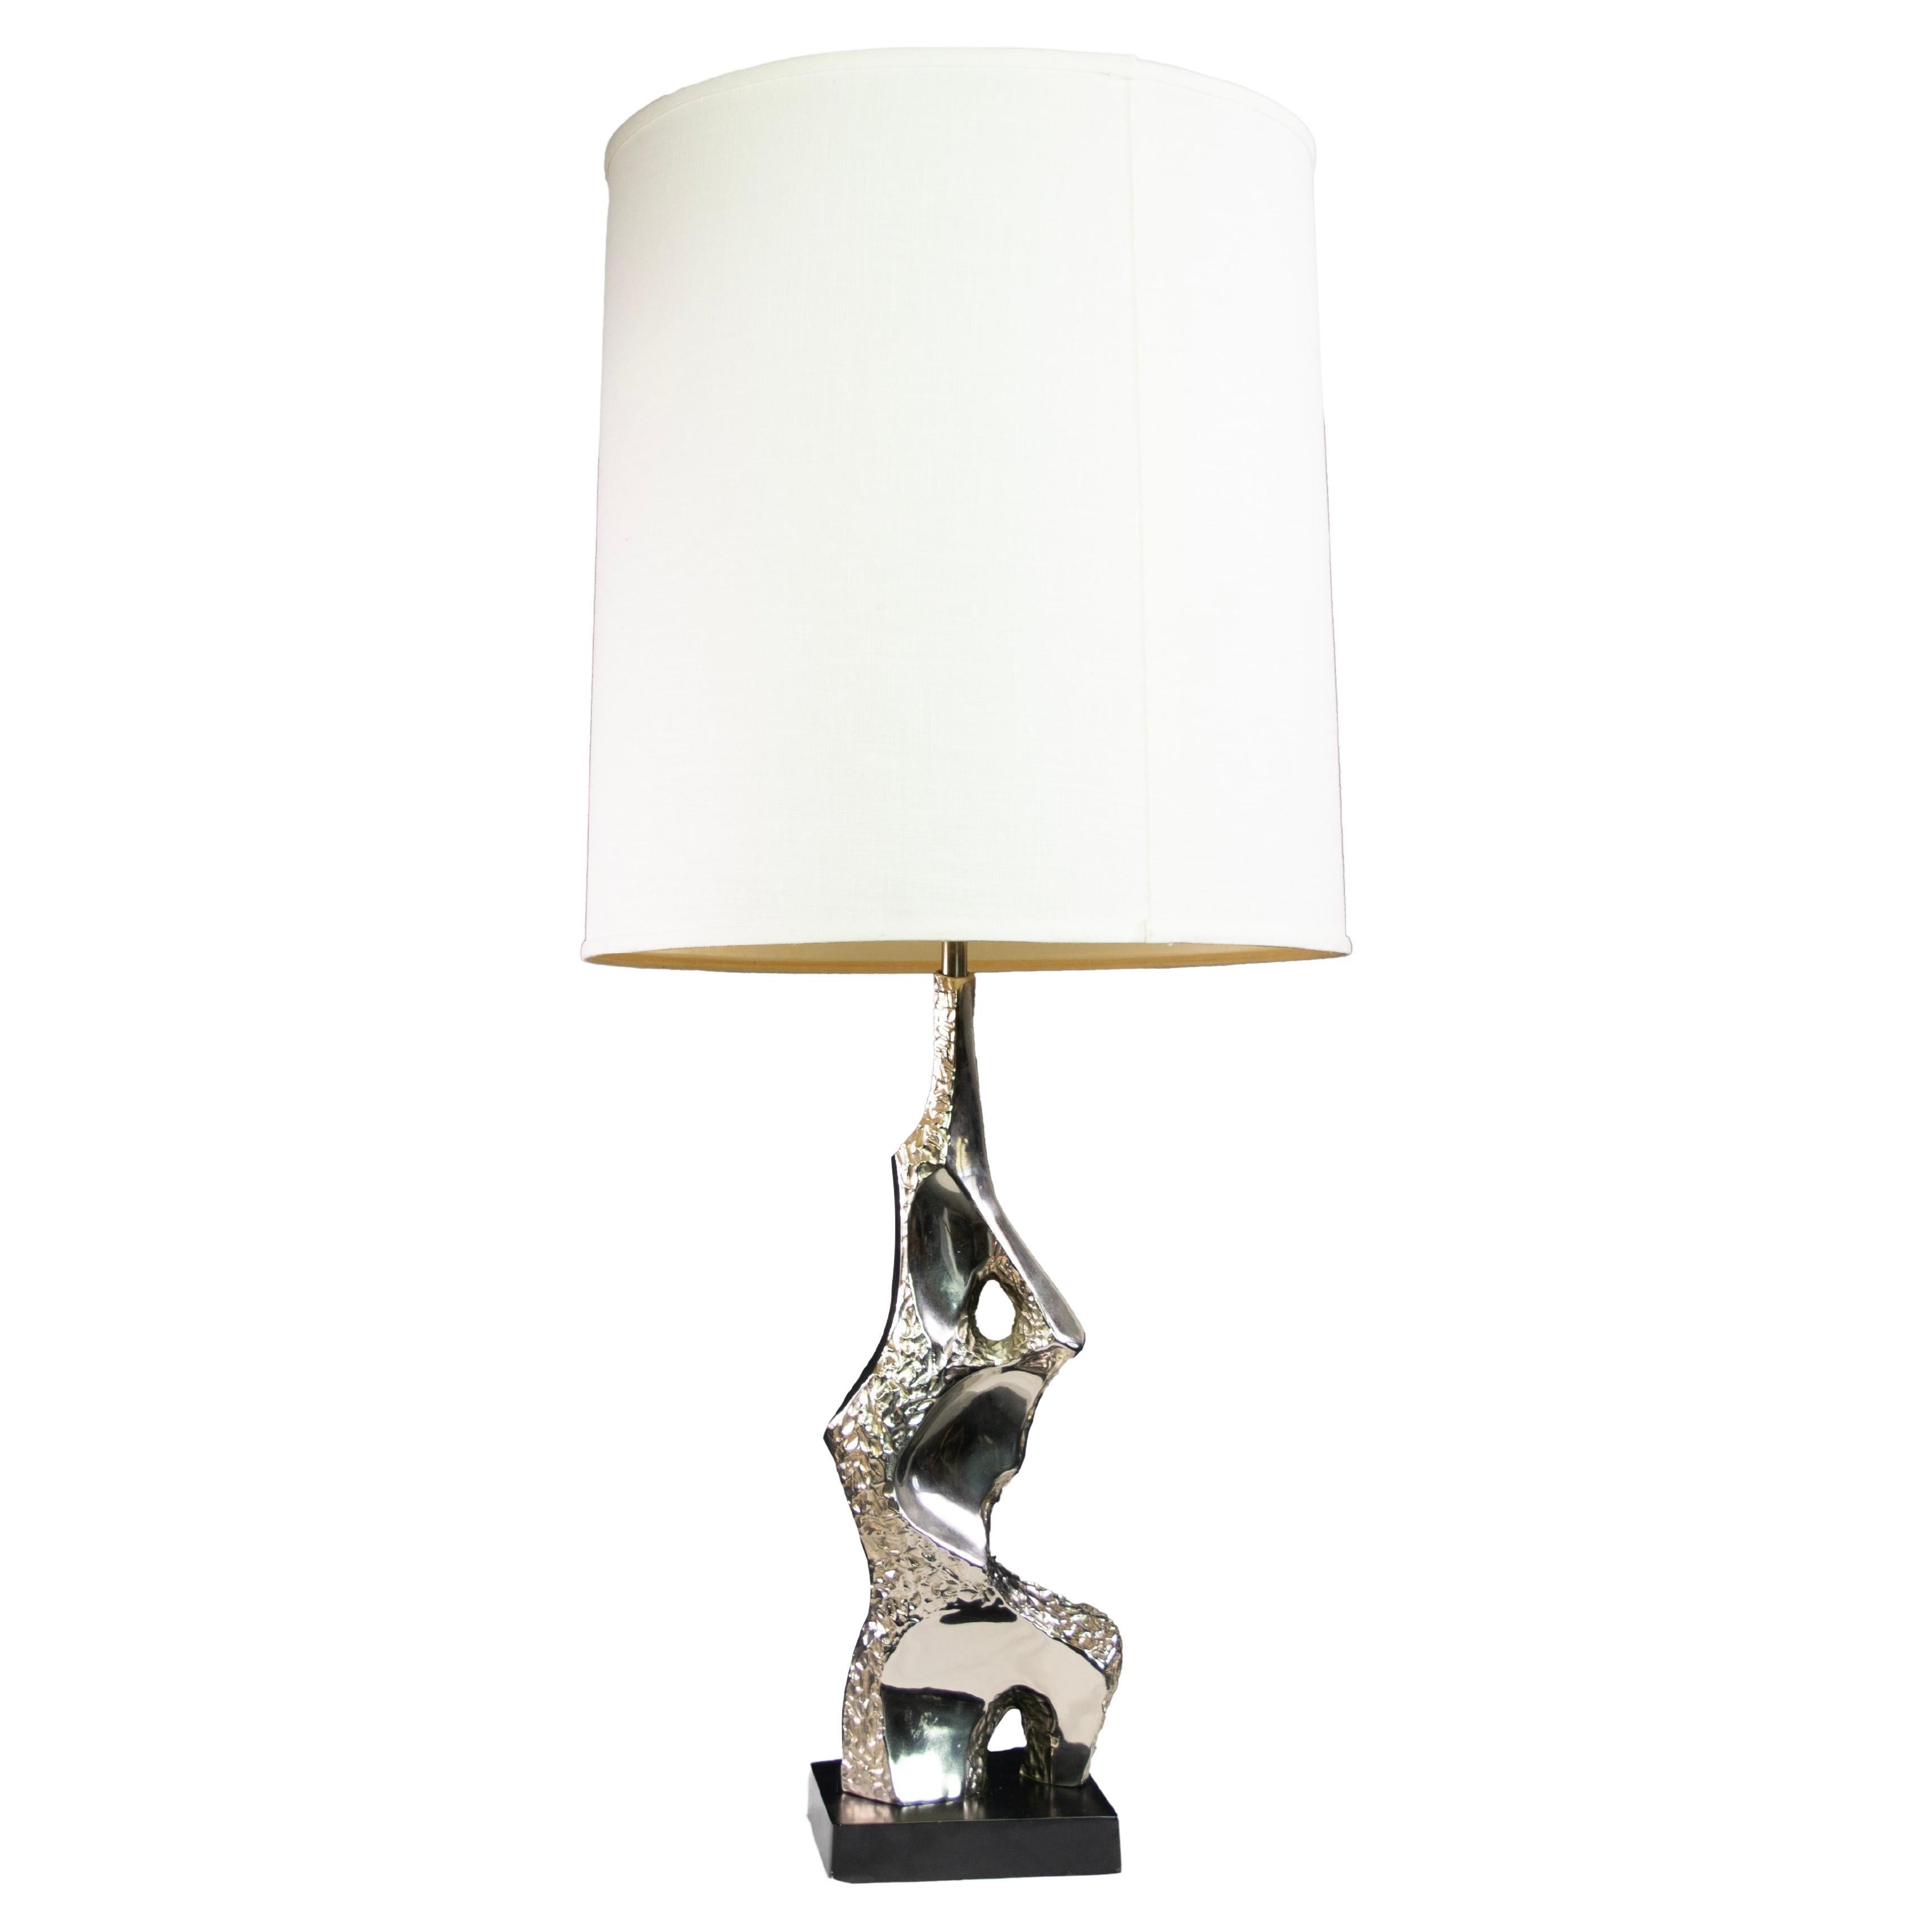 Brutalist Abstract "Sitting Nude" Chrome Lamp by Richard Barr for Laurel Lamp Co For Sale